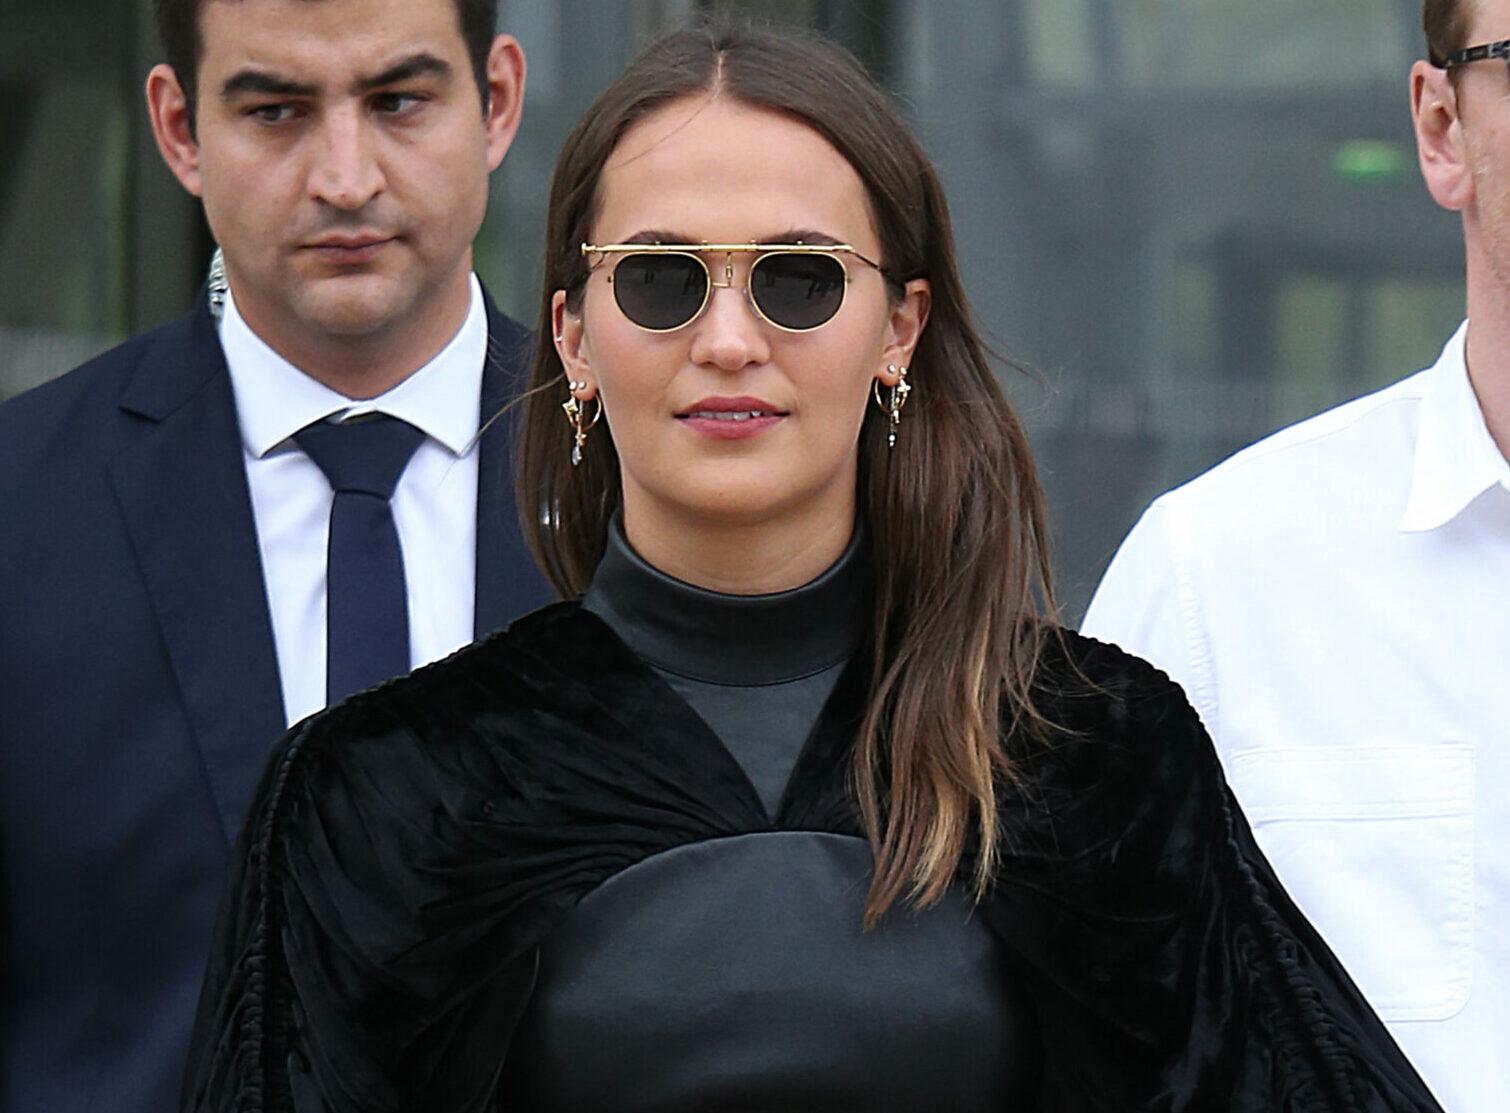 Alicia Vikander and Michael Fassbender seen in Paris